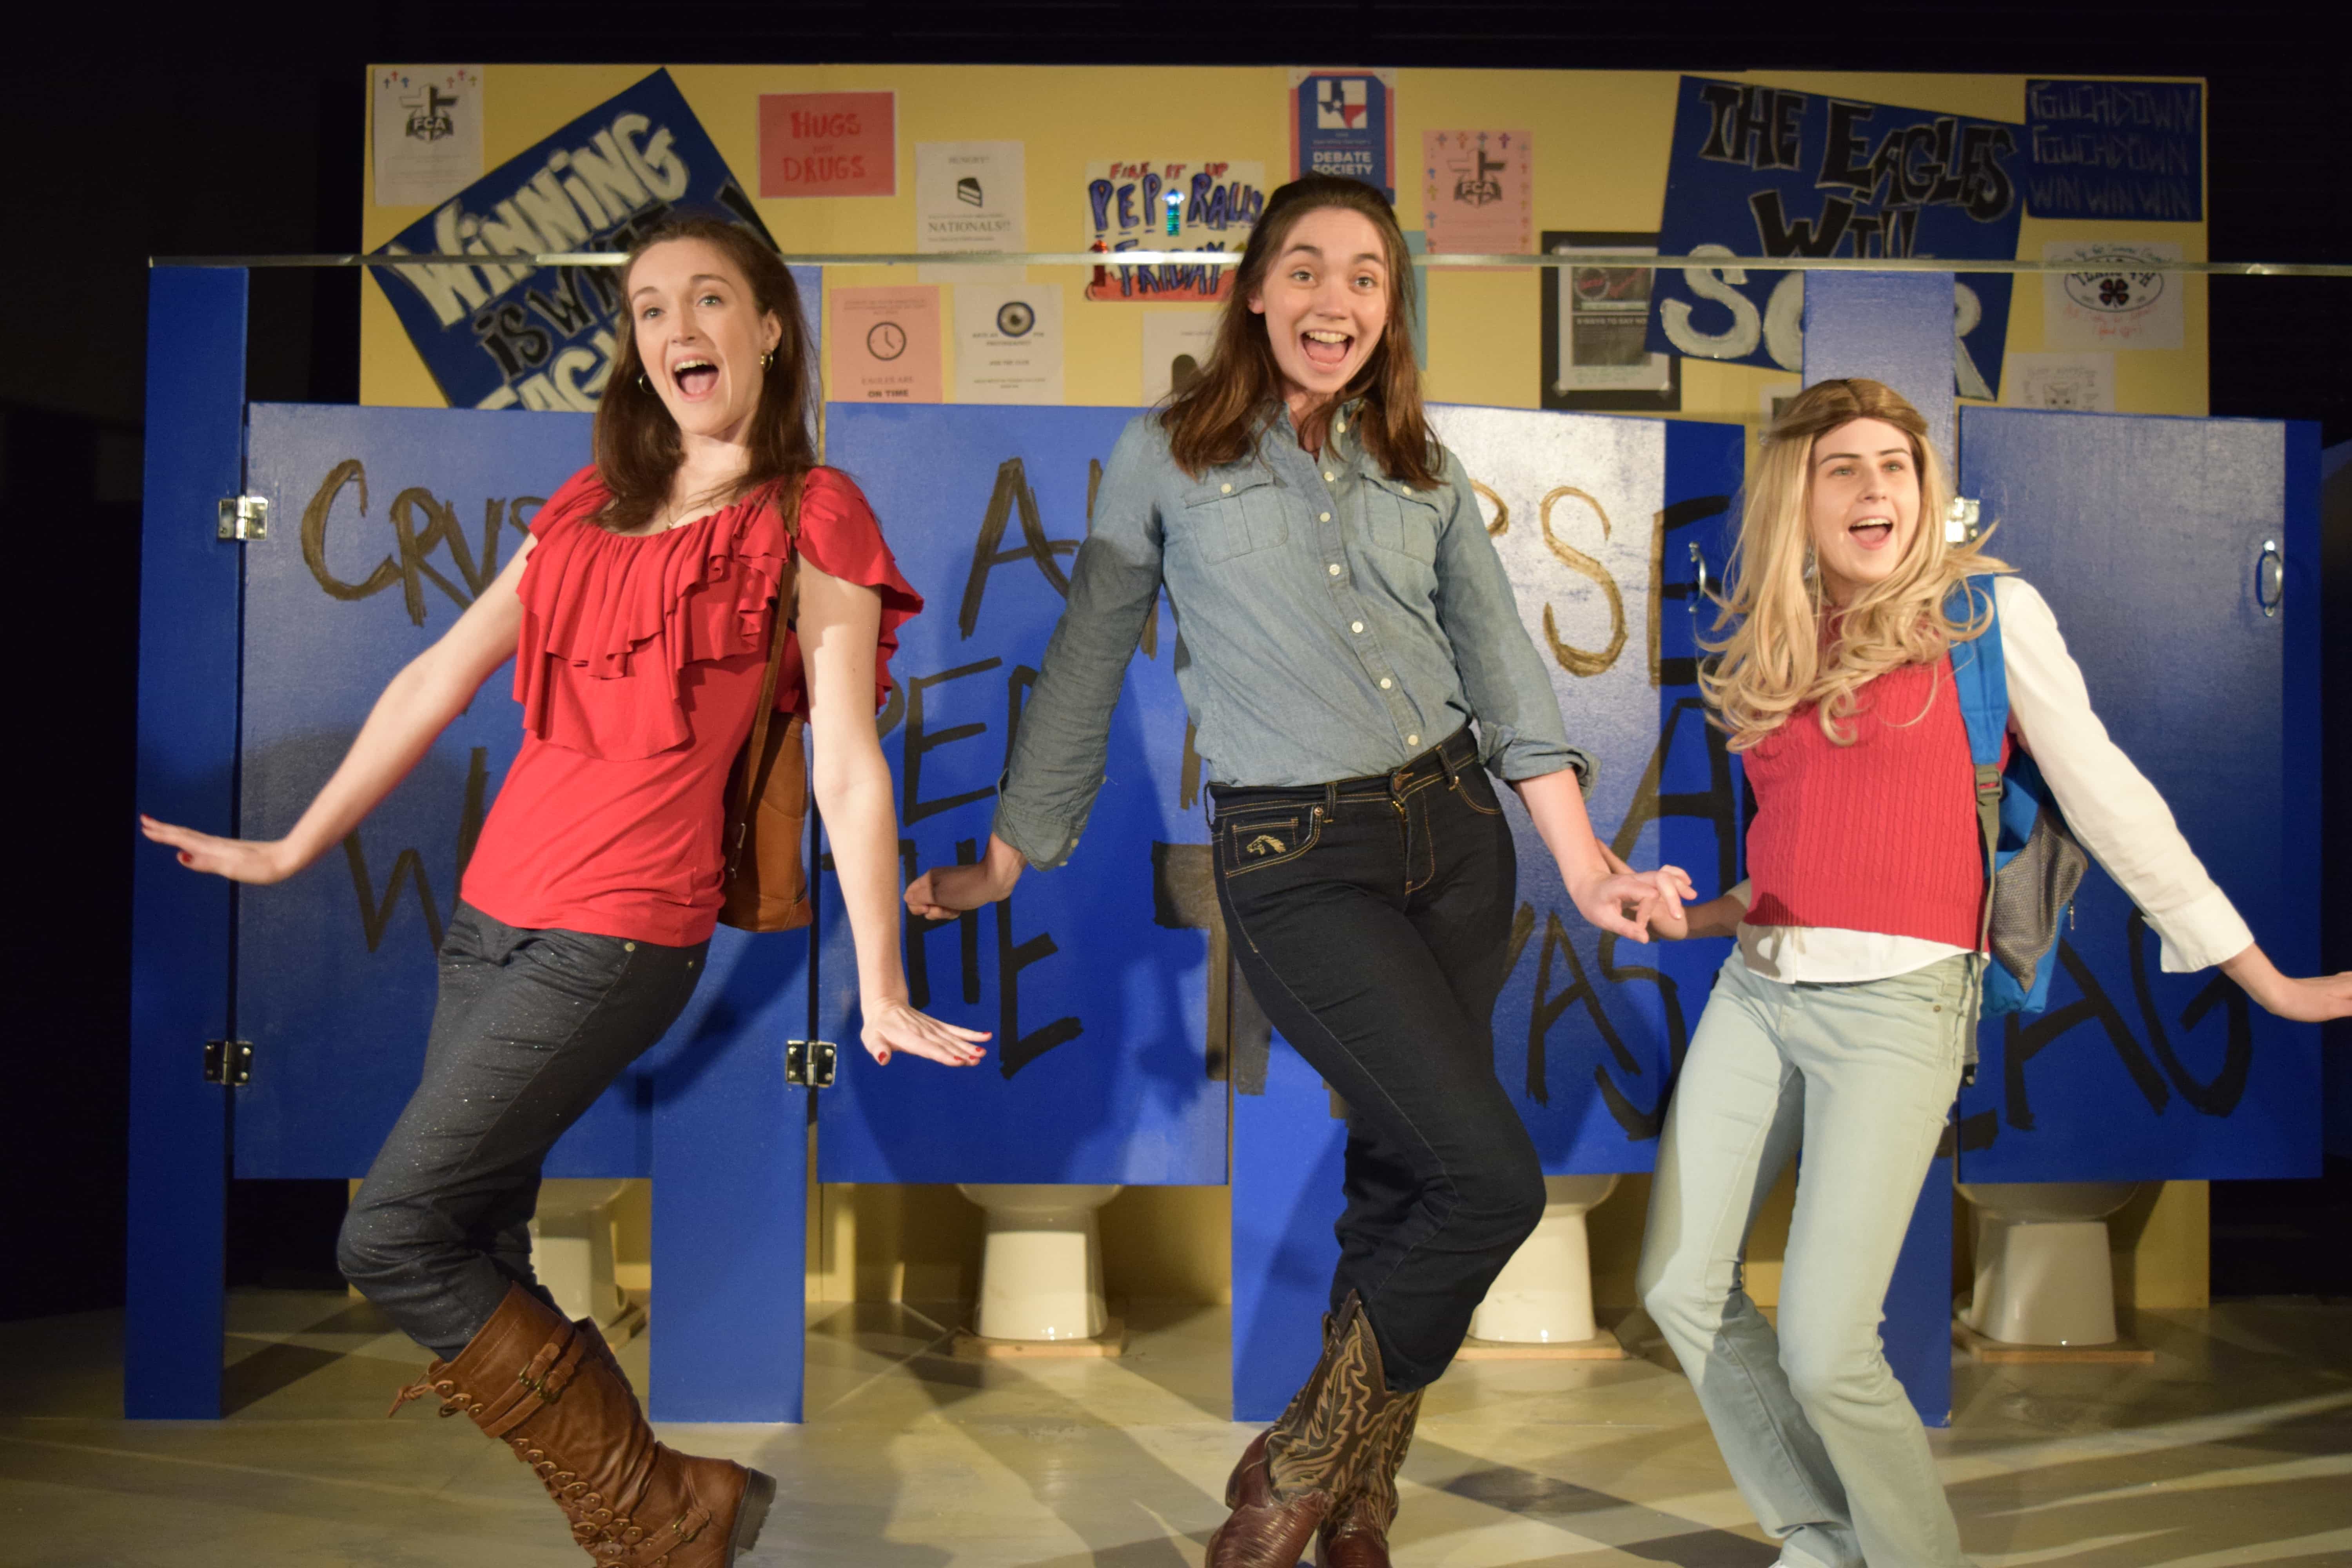 Jess (Kira Burri), Tammy (Brooke Friday) and Sammy (Claire Derriennic) are excited by some gossip on the bathroom wall. Photo by Kanea McDonald.